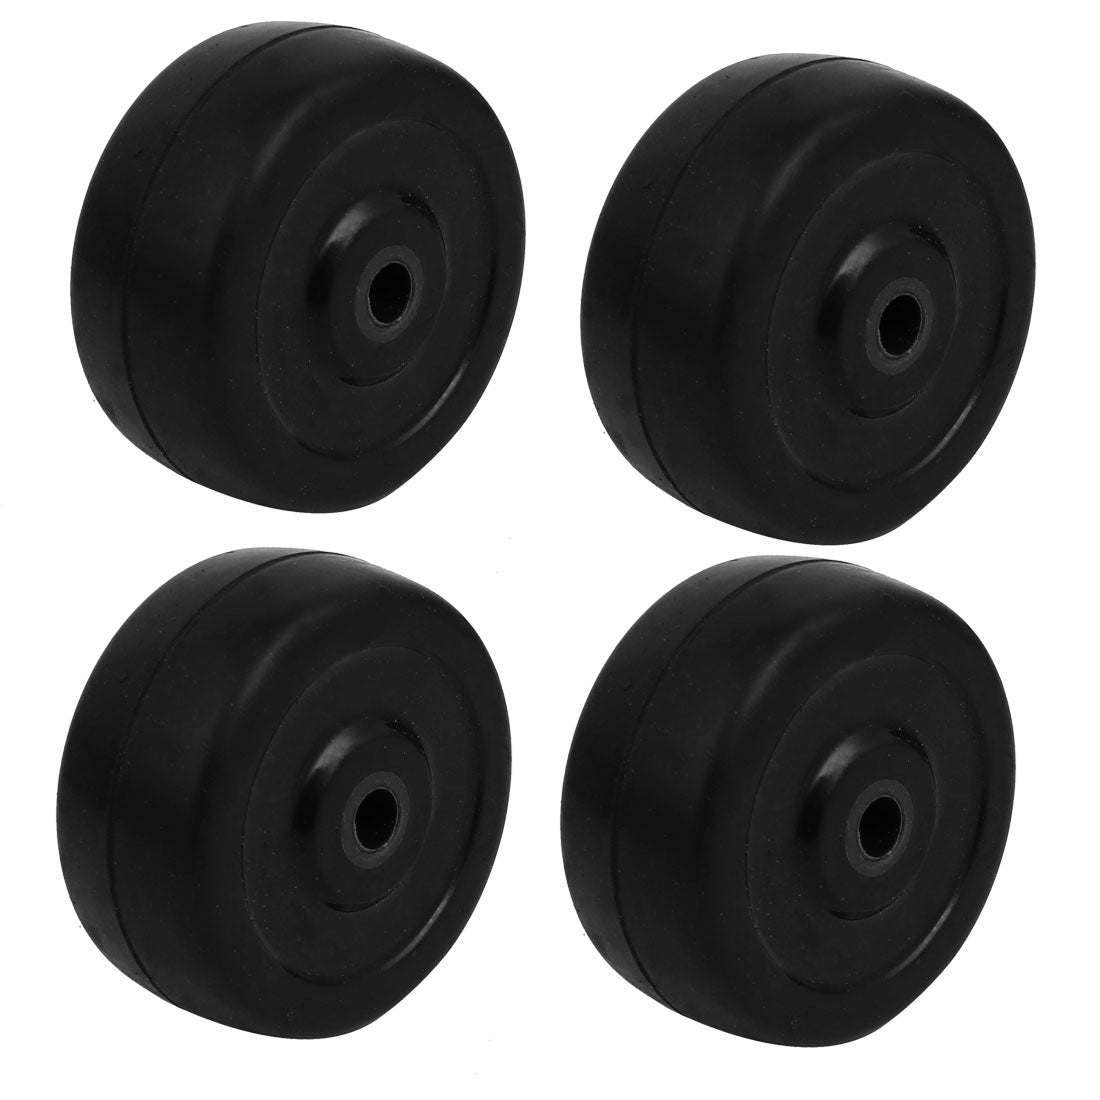 Uxcell Uxcell 1.5-inch Diameter Rubber Wheel Skateboard Trolley Caster Pulley Black 4pcs